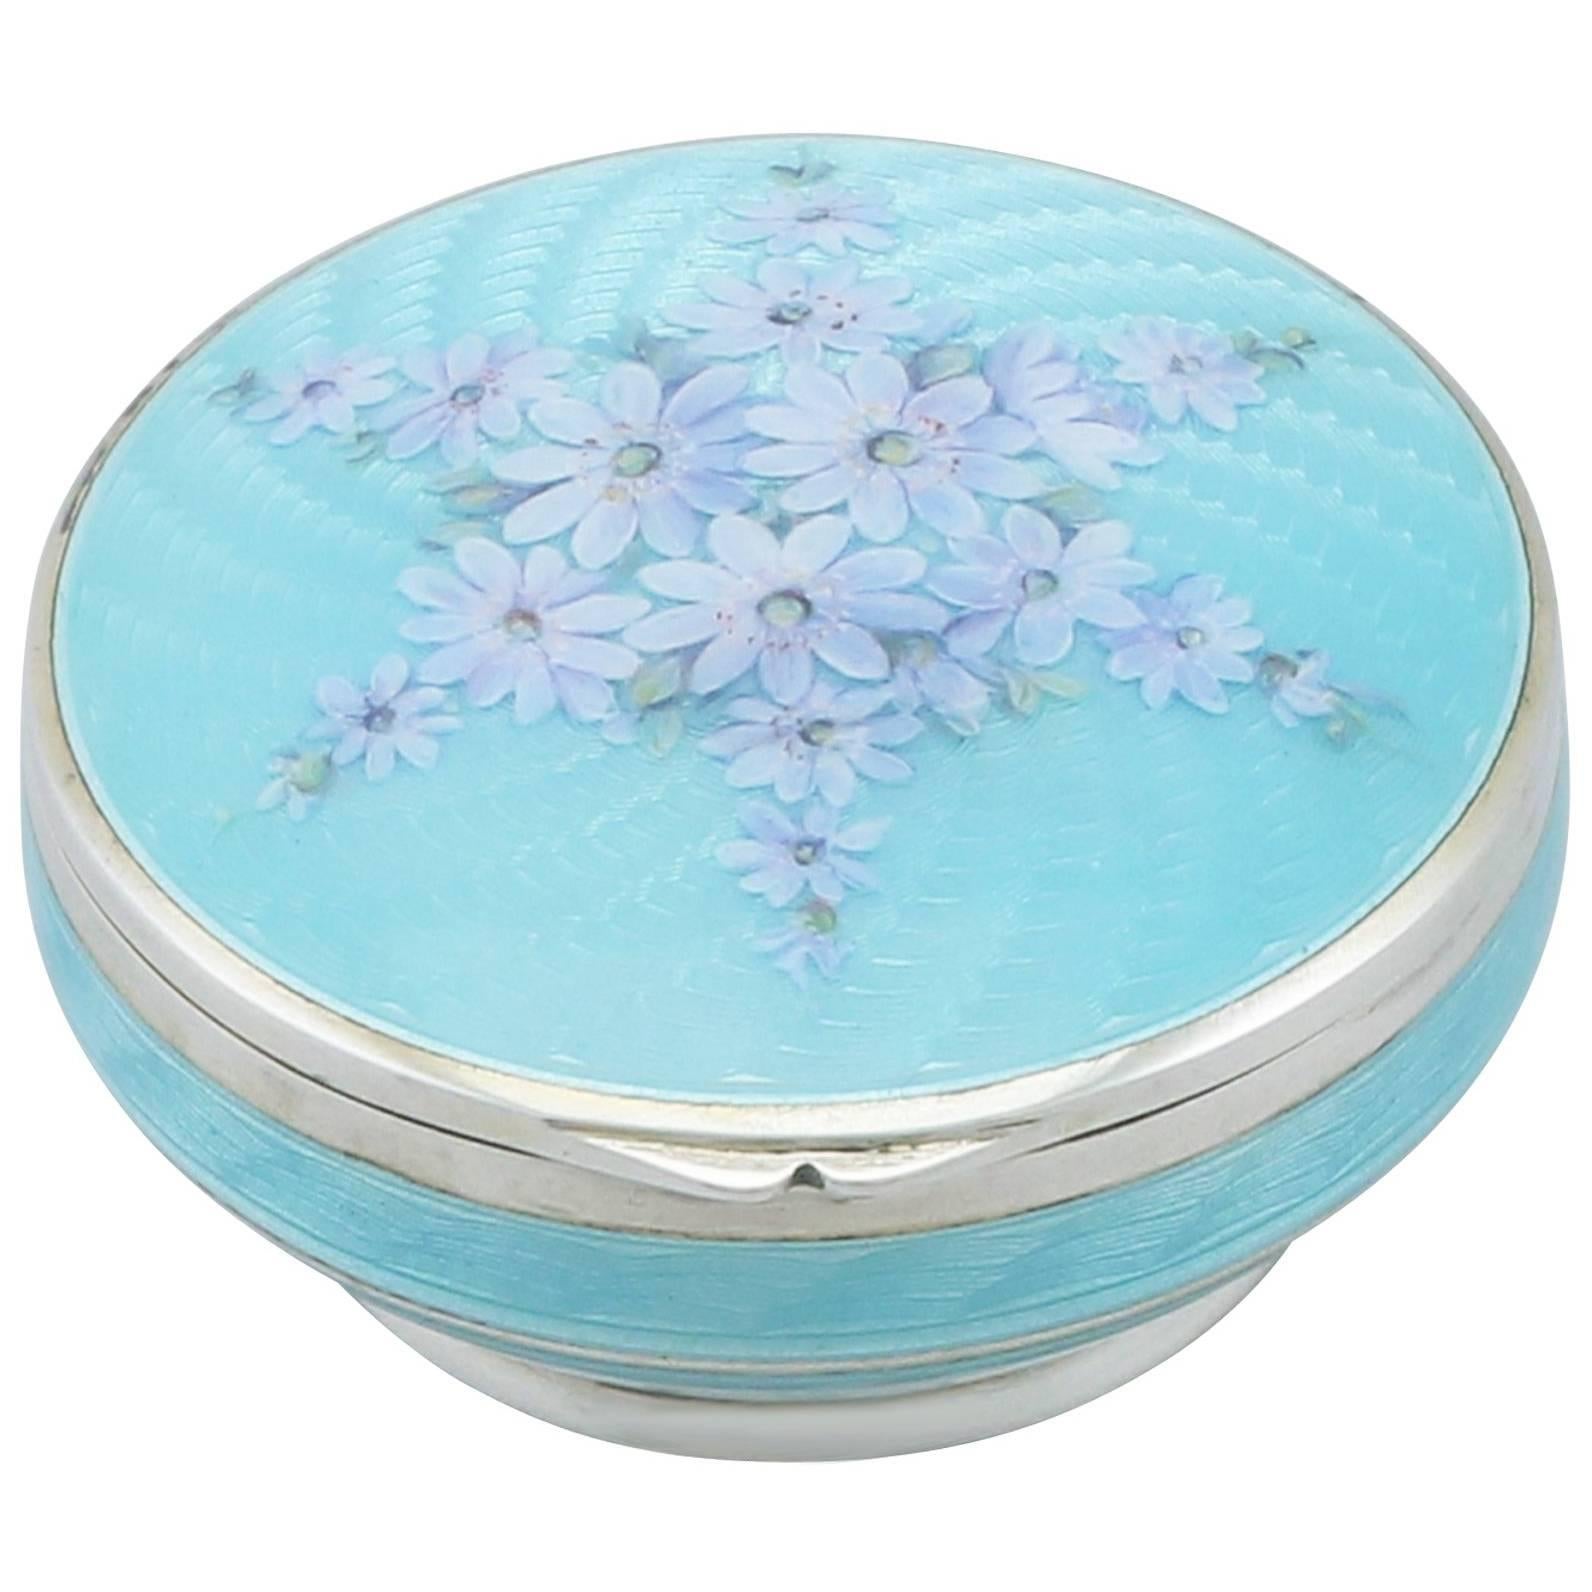 1910s Antique Sterling Silver and Enamel Box